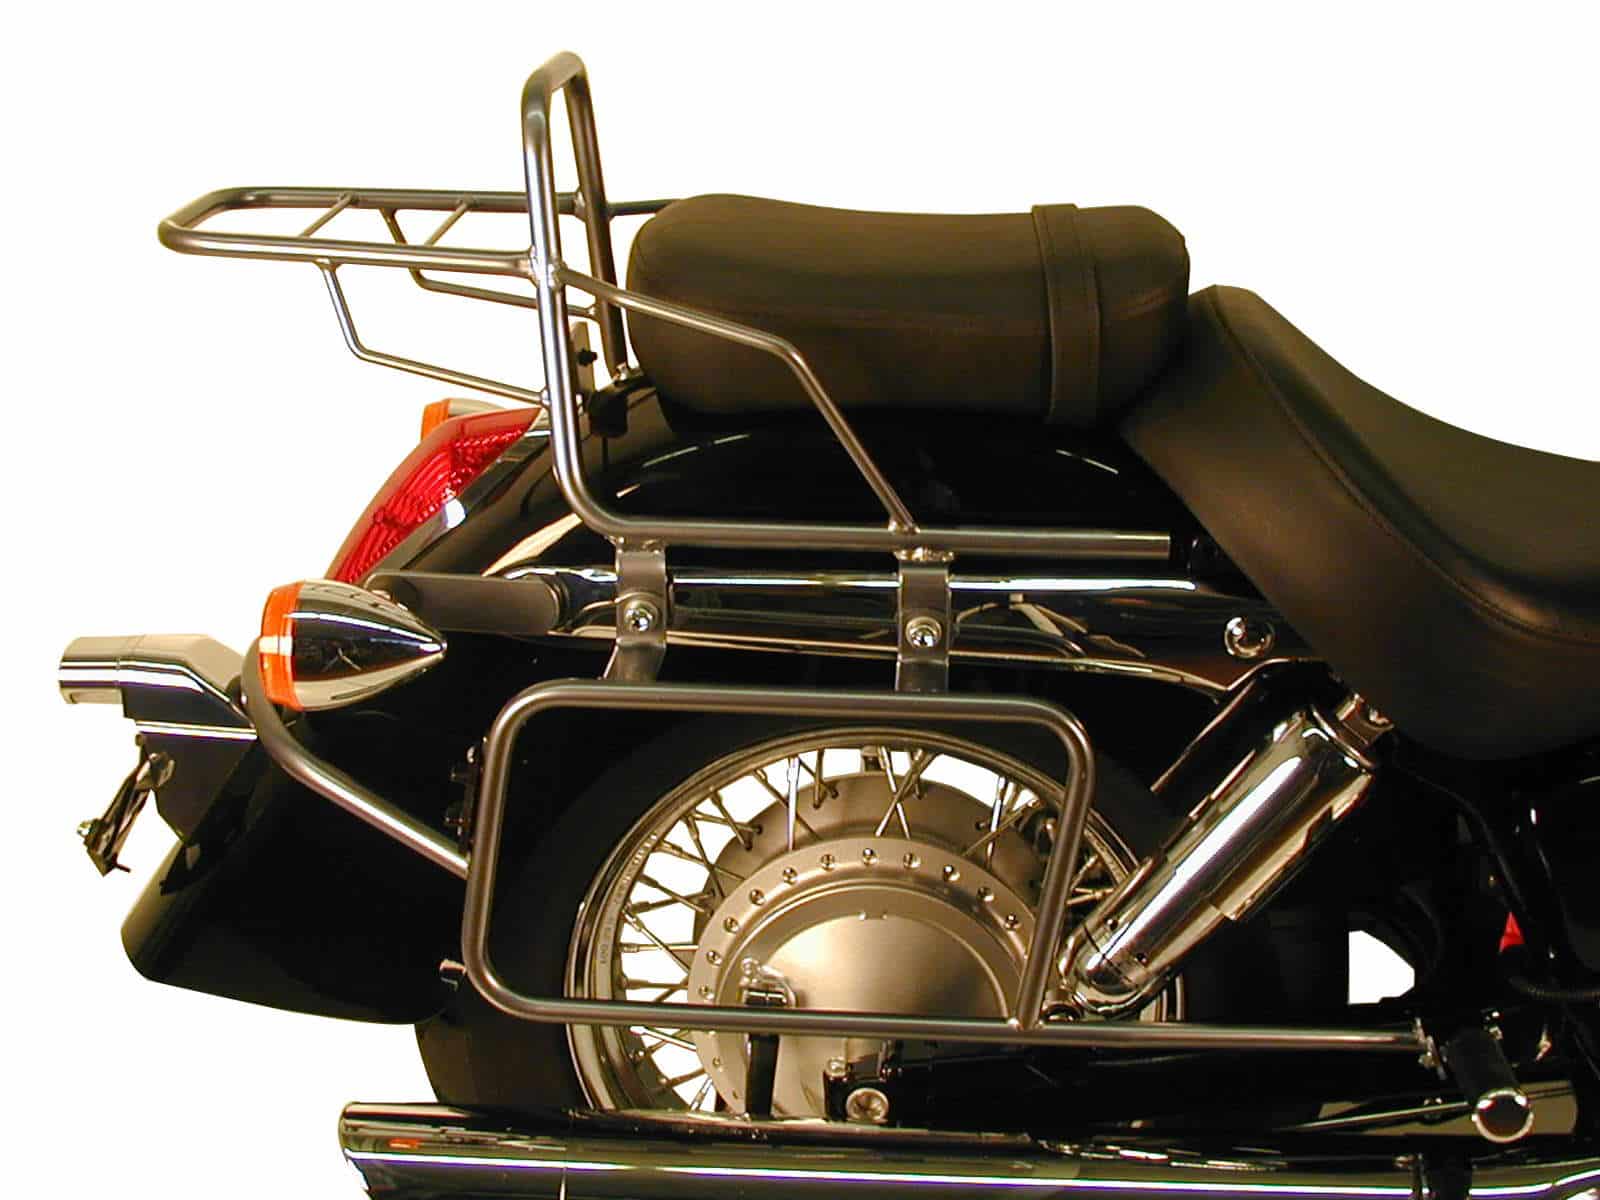 Sidecarrier permanent mounted chrome for Honda VT 750 Shadow (2004-2007)